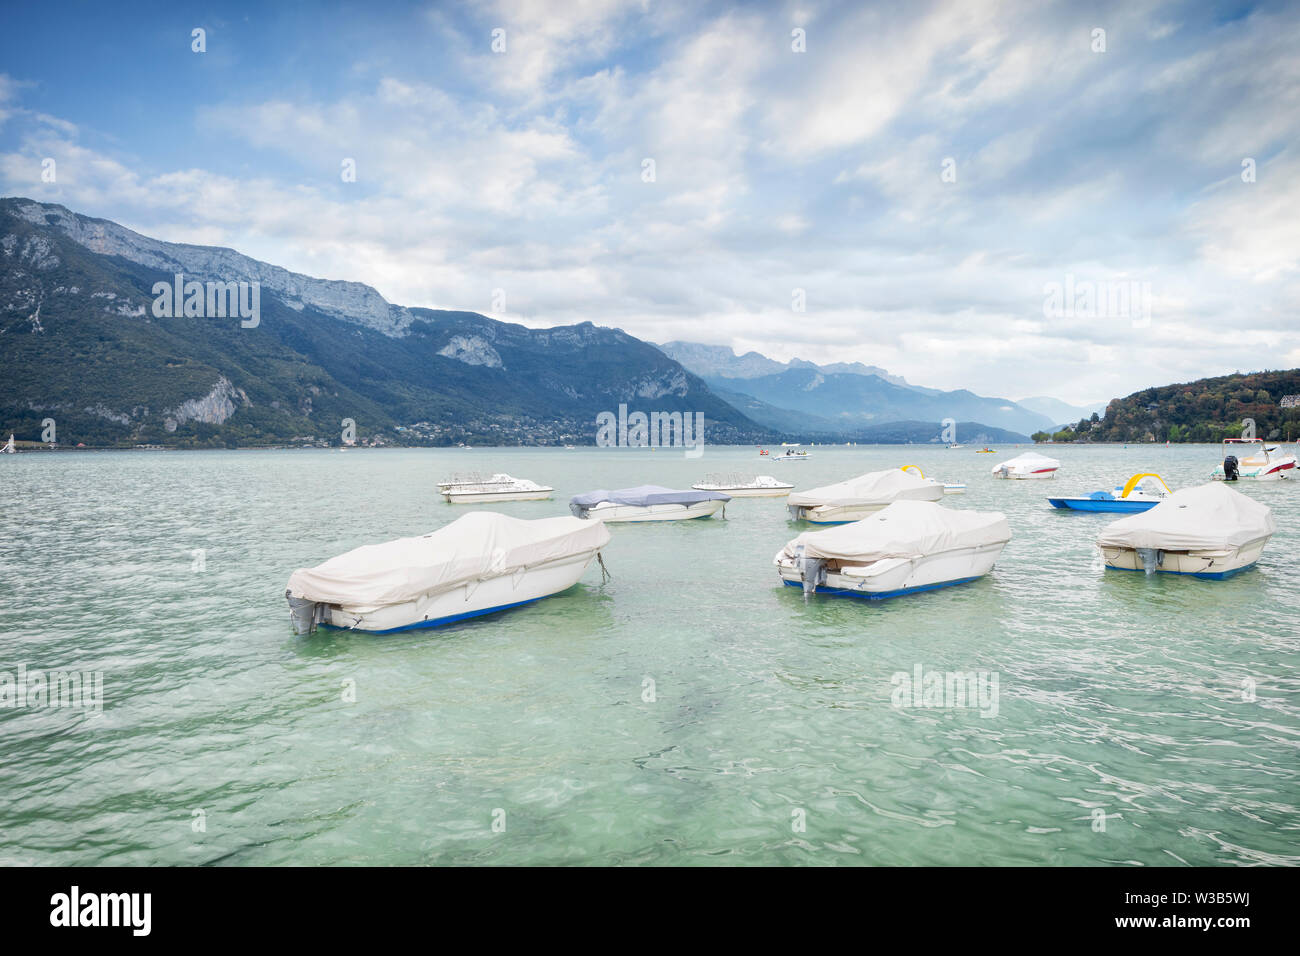 Lake of Annecy. Moody landscape with boats Stock Photo